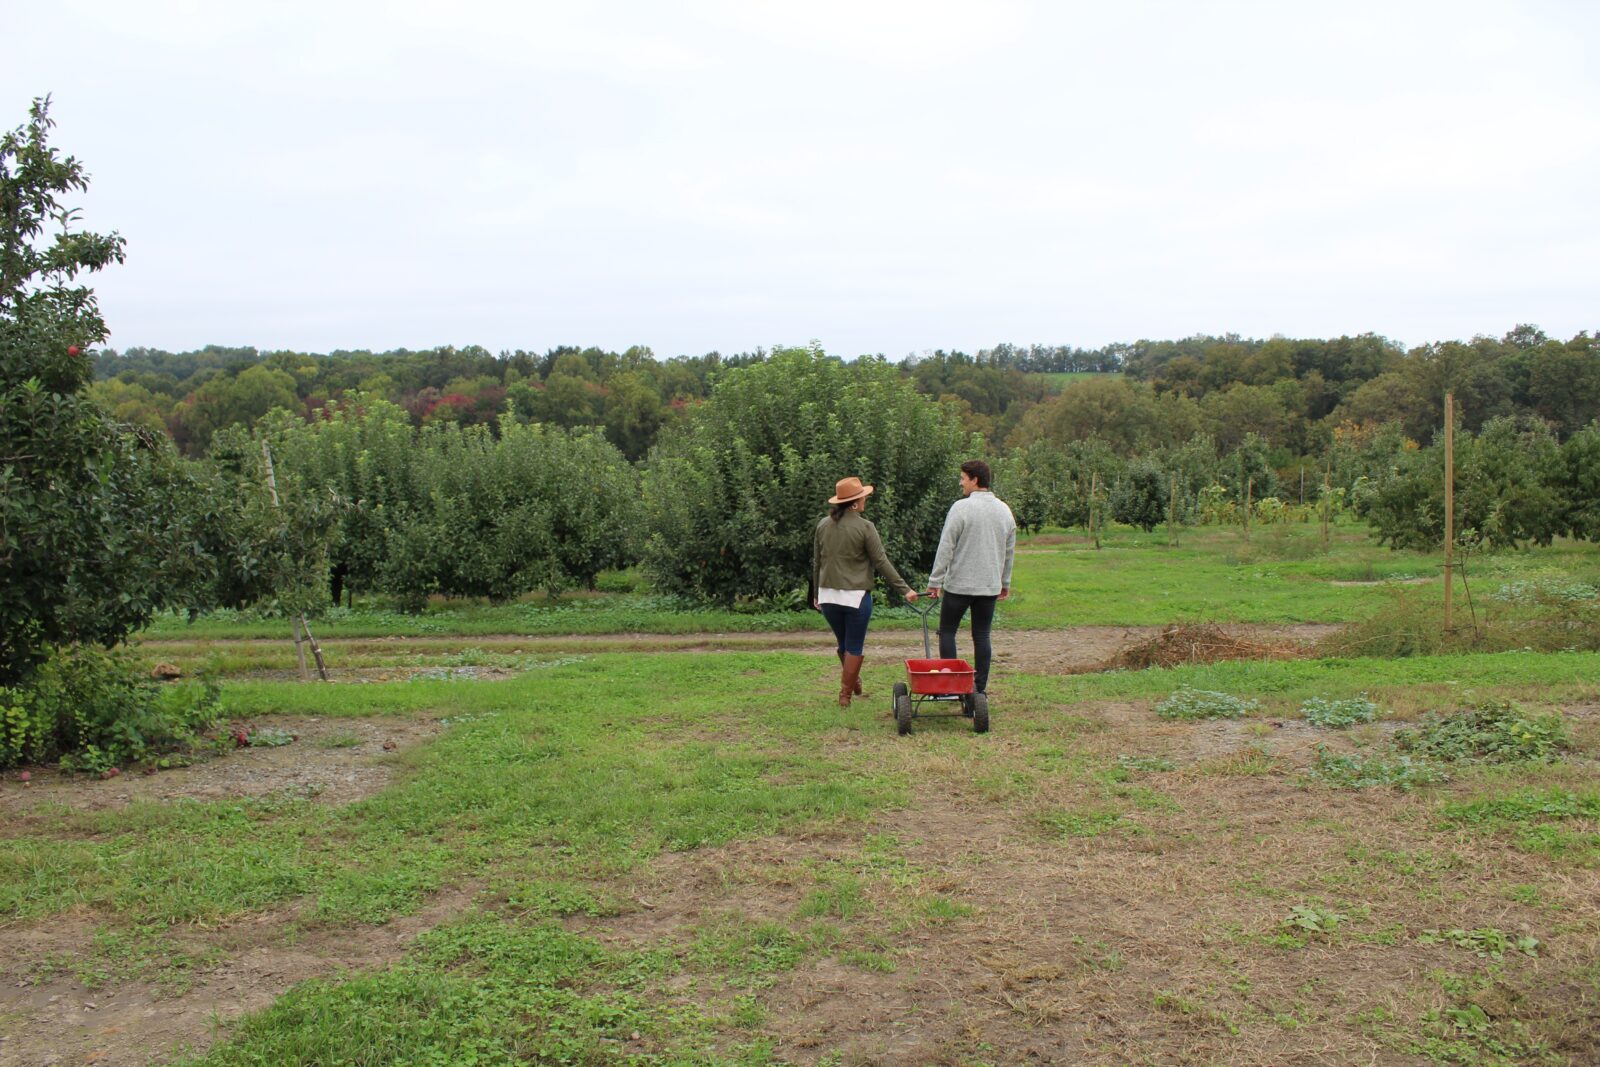 Couple Fruit Picking. Photo Credit: Discover Lancaster